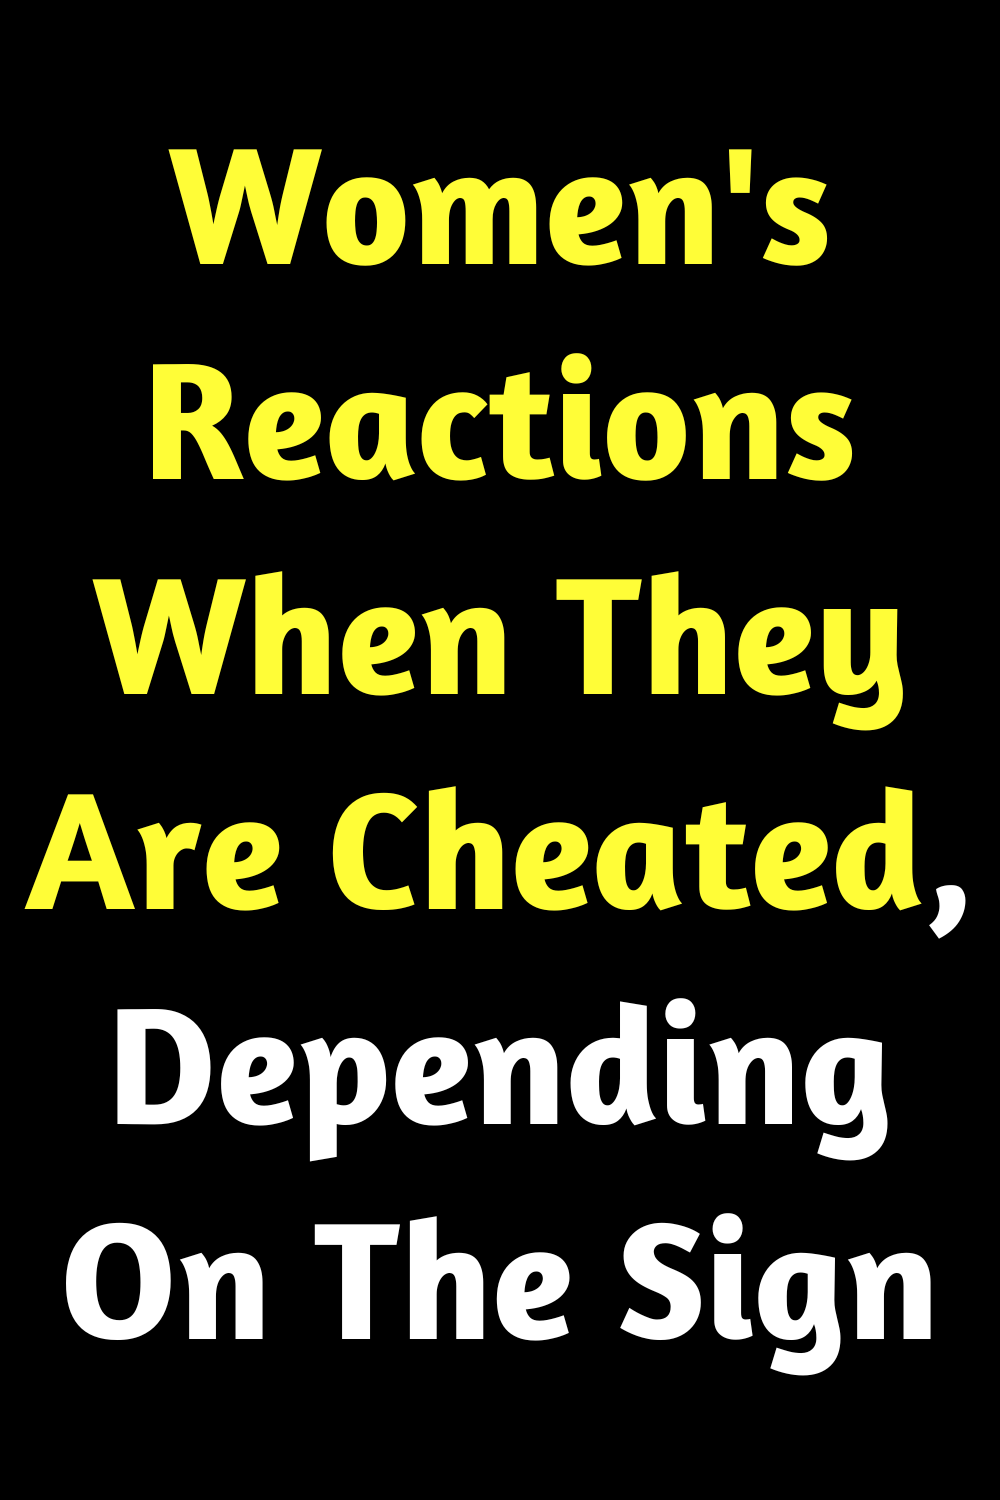 Women's Reactions When They Are Cheated, Depending On The Sign